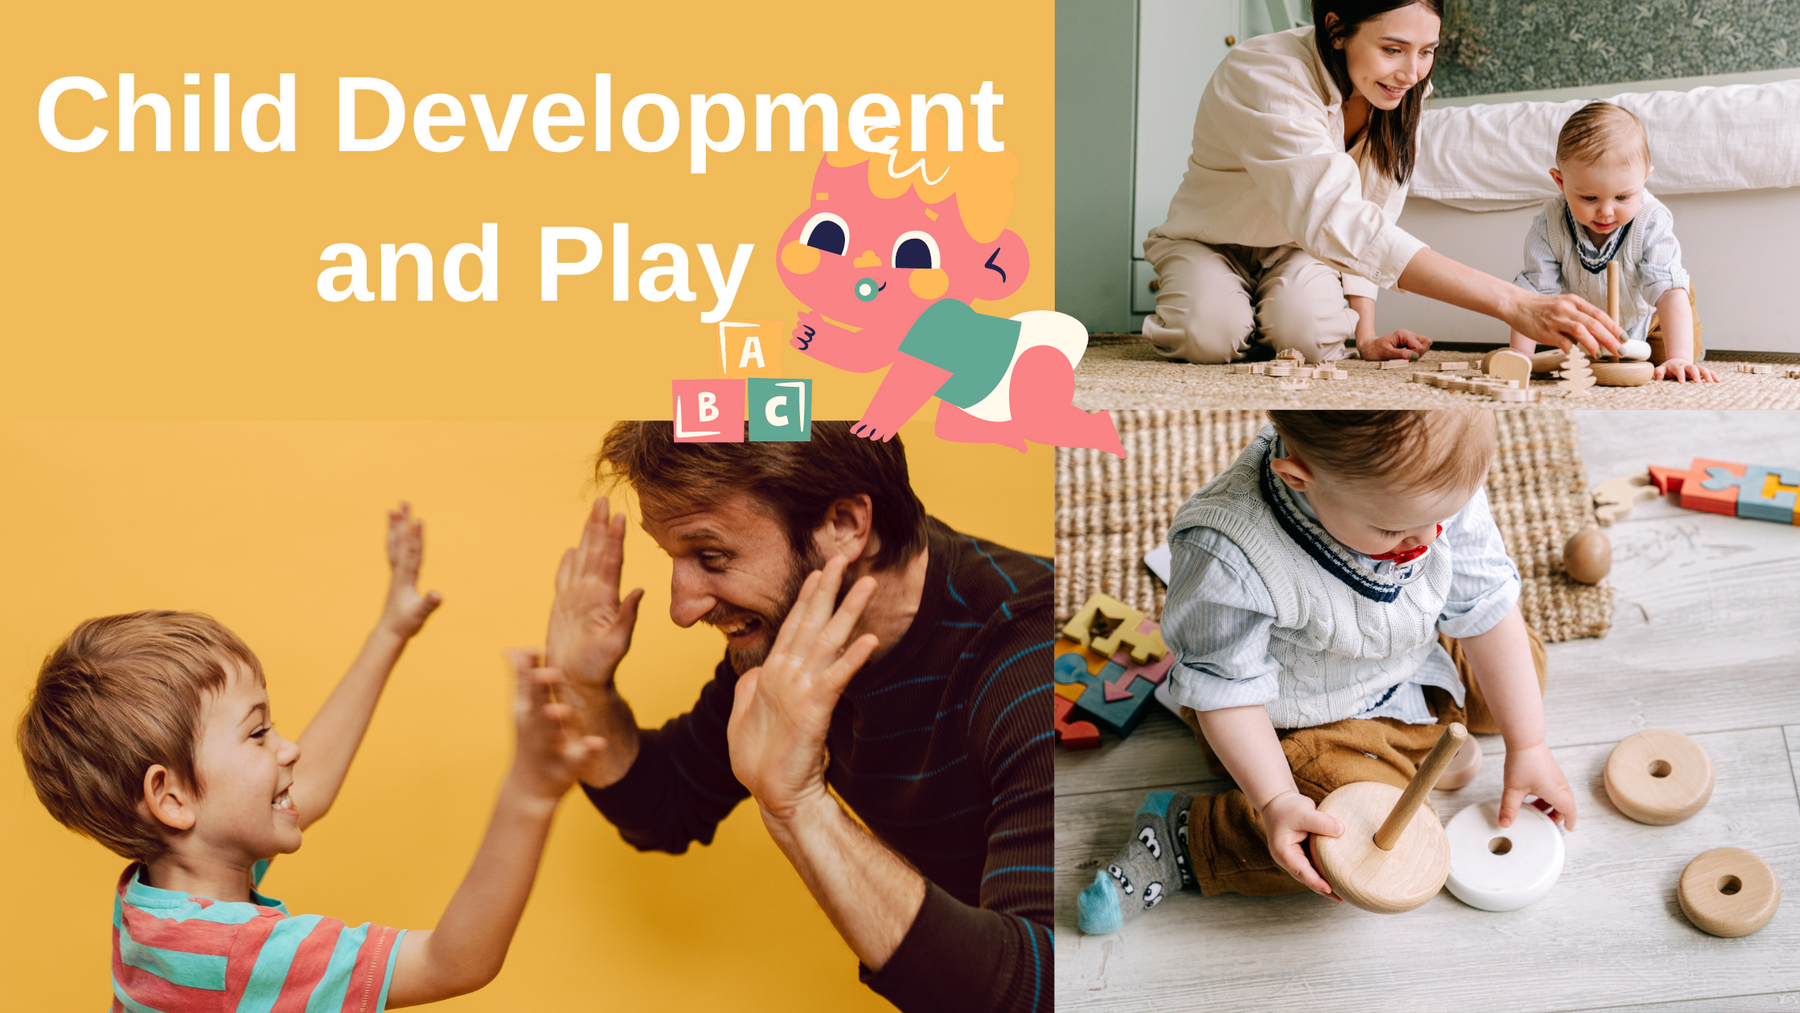 Header "Child Development and Play" with graphic of a baby with alphabet blocks. Collage of images of adult playing with toddler with stacking toys, toddler playing with stacking toys alone, and adult and kid high-fiving.